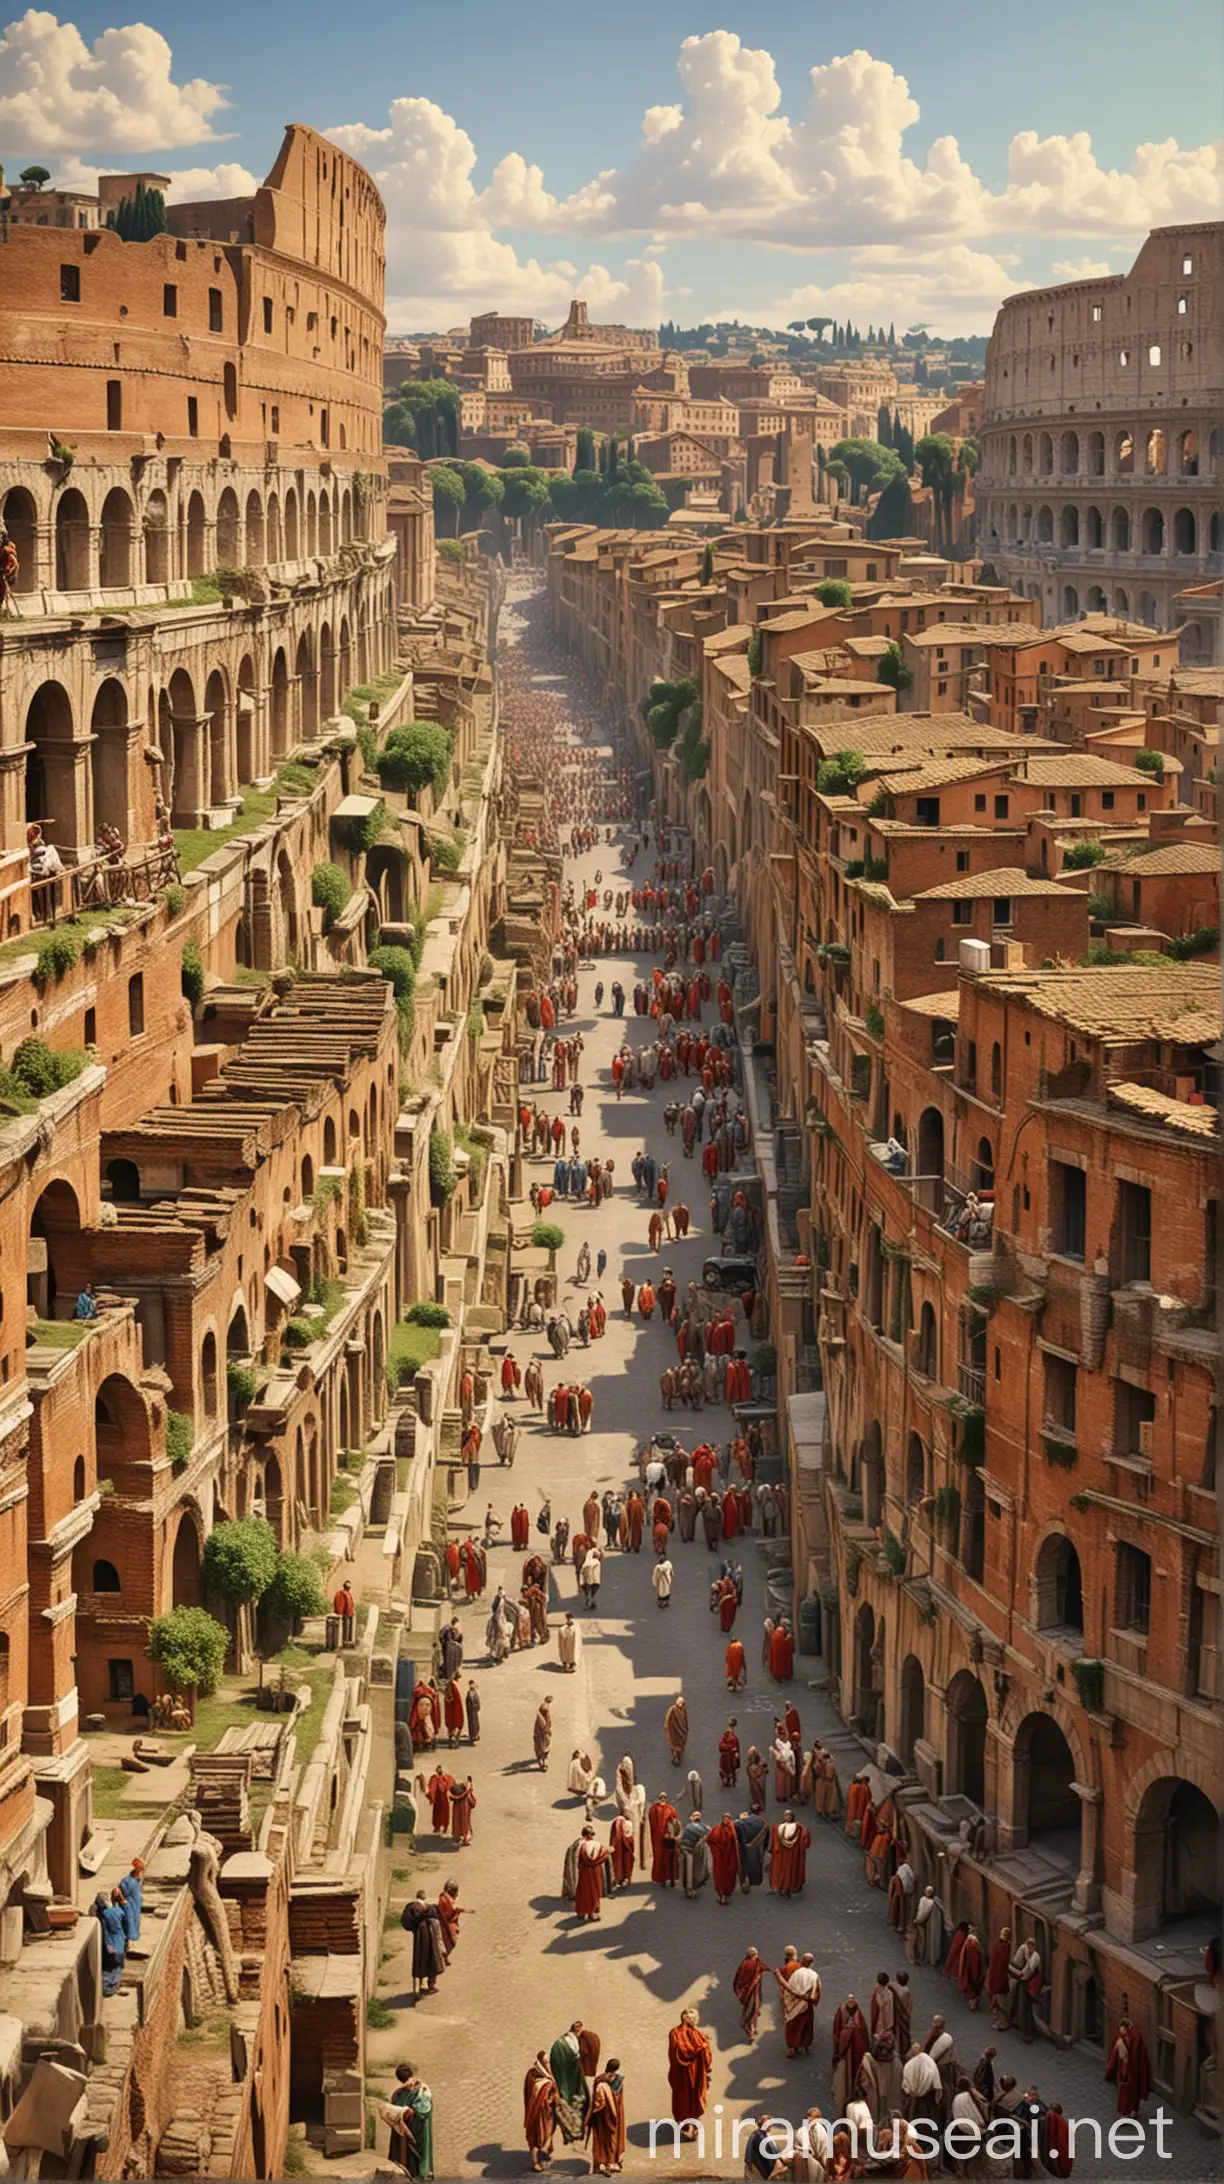 Illustrate a vibrant scene of Rome in the 1st century AD. Include architectural landmarks like the Colosseum and typical Roman streets bustling with life. Ensure the atmosphere reflects the era, with people in traditional Roman attire engaging in daily activities."In the ancient world 